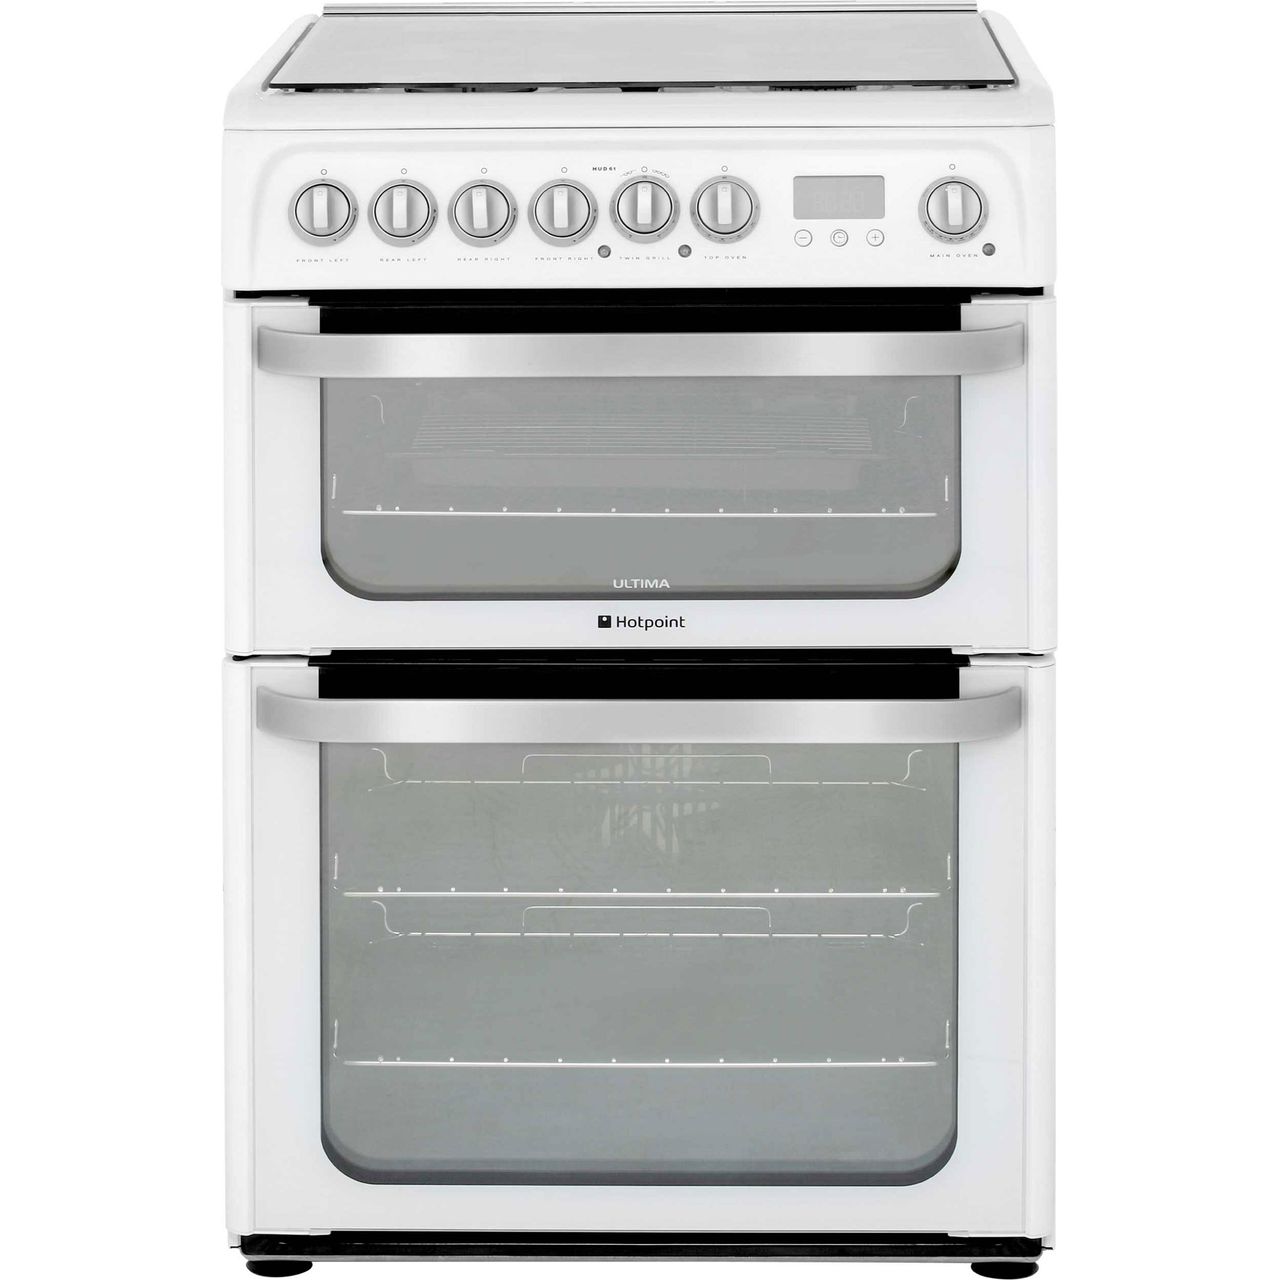 Hotpoint Ultima HUD61PS 60cm Dual Fuel Cooker Review